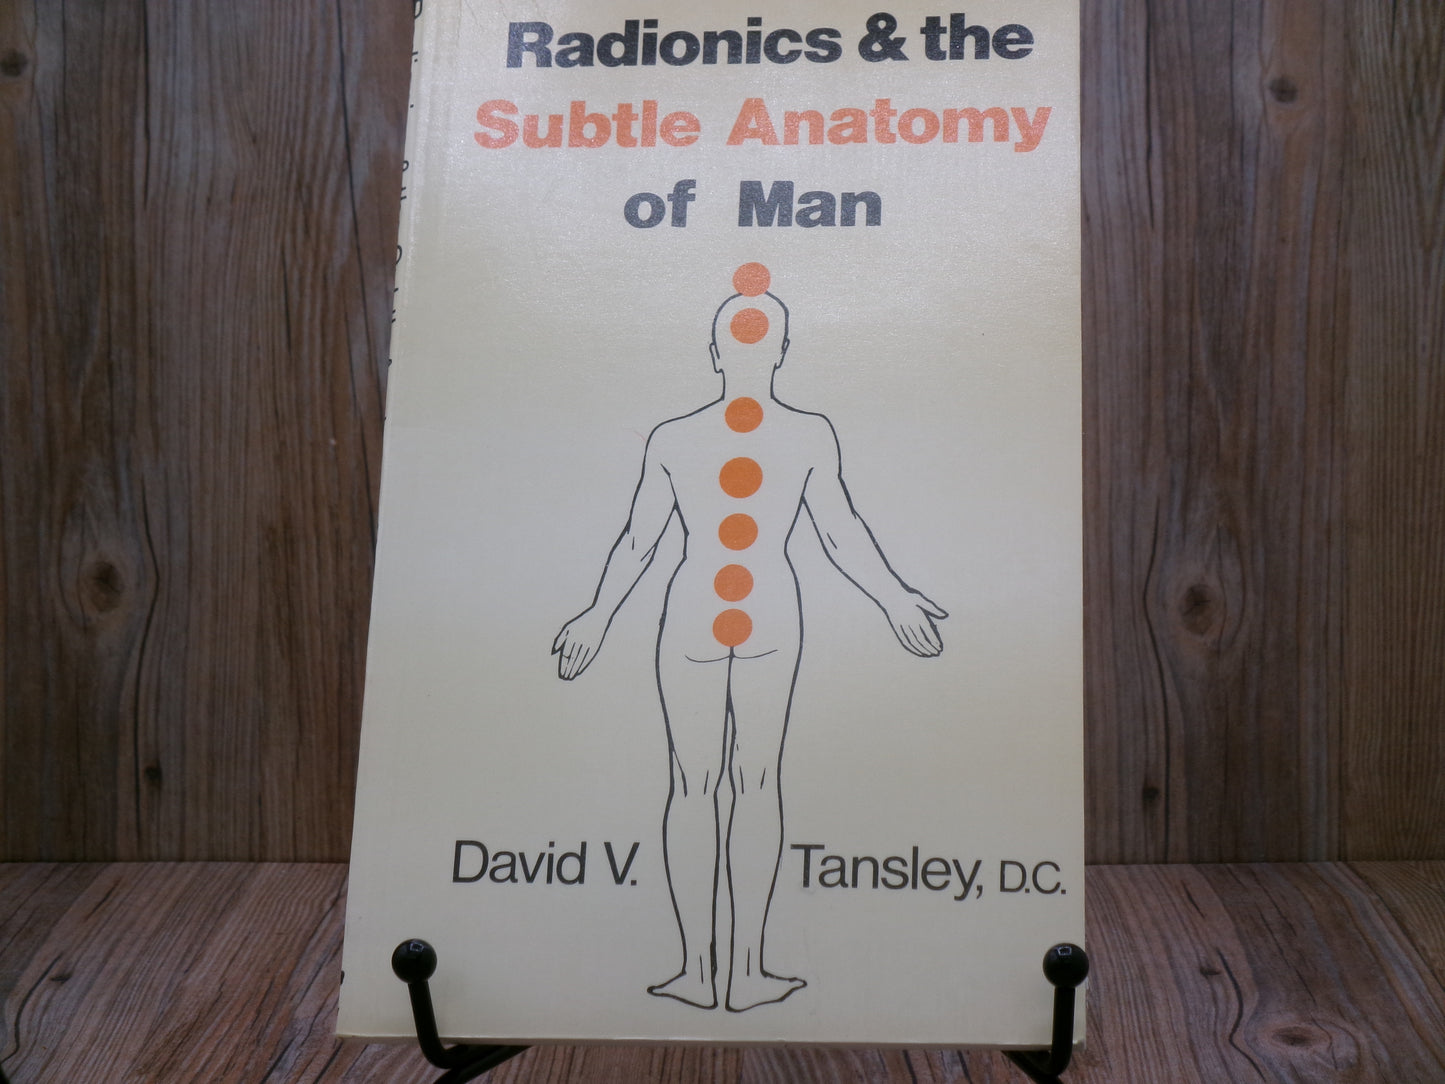 Radionics and The Subtle Anatomy of Man by David V. Tansley